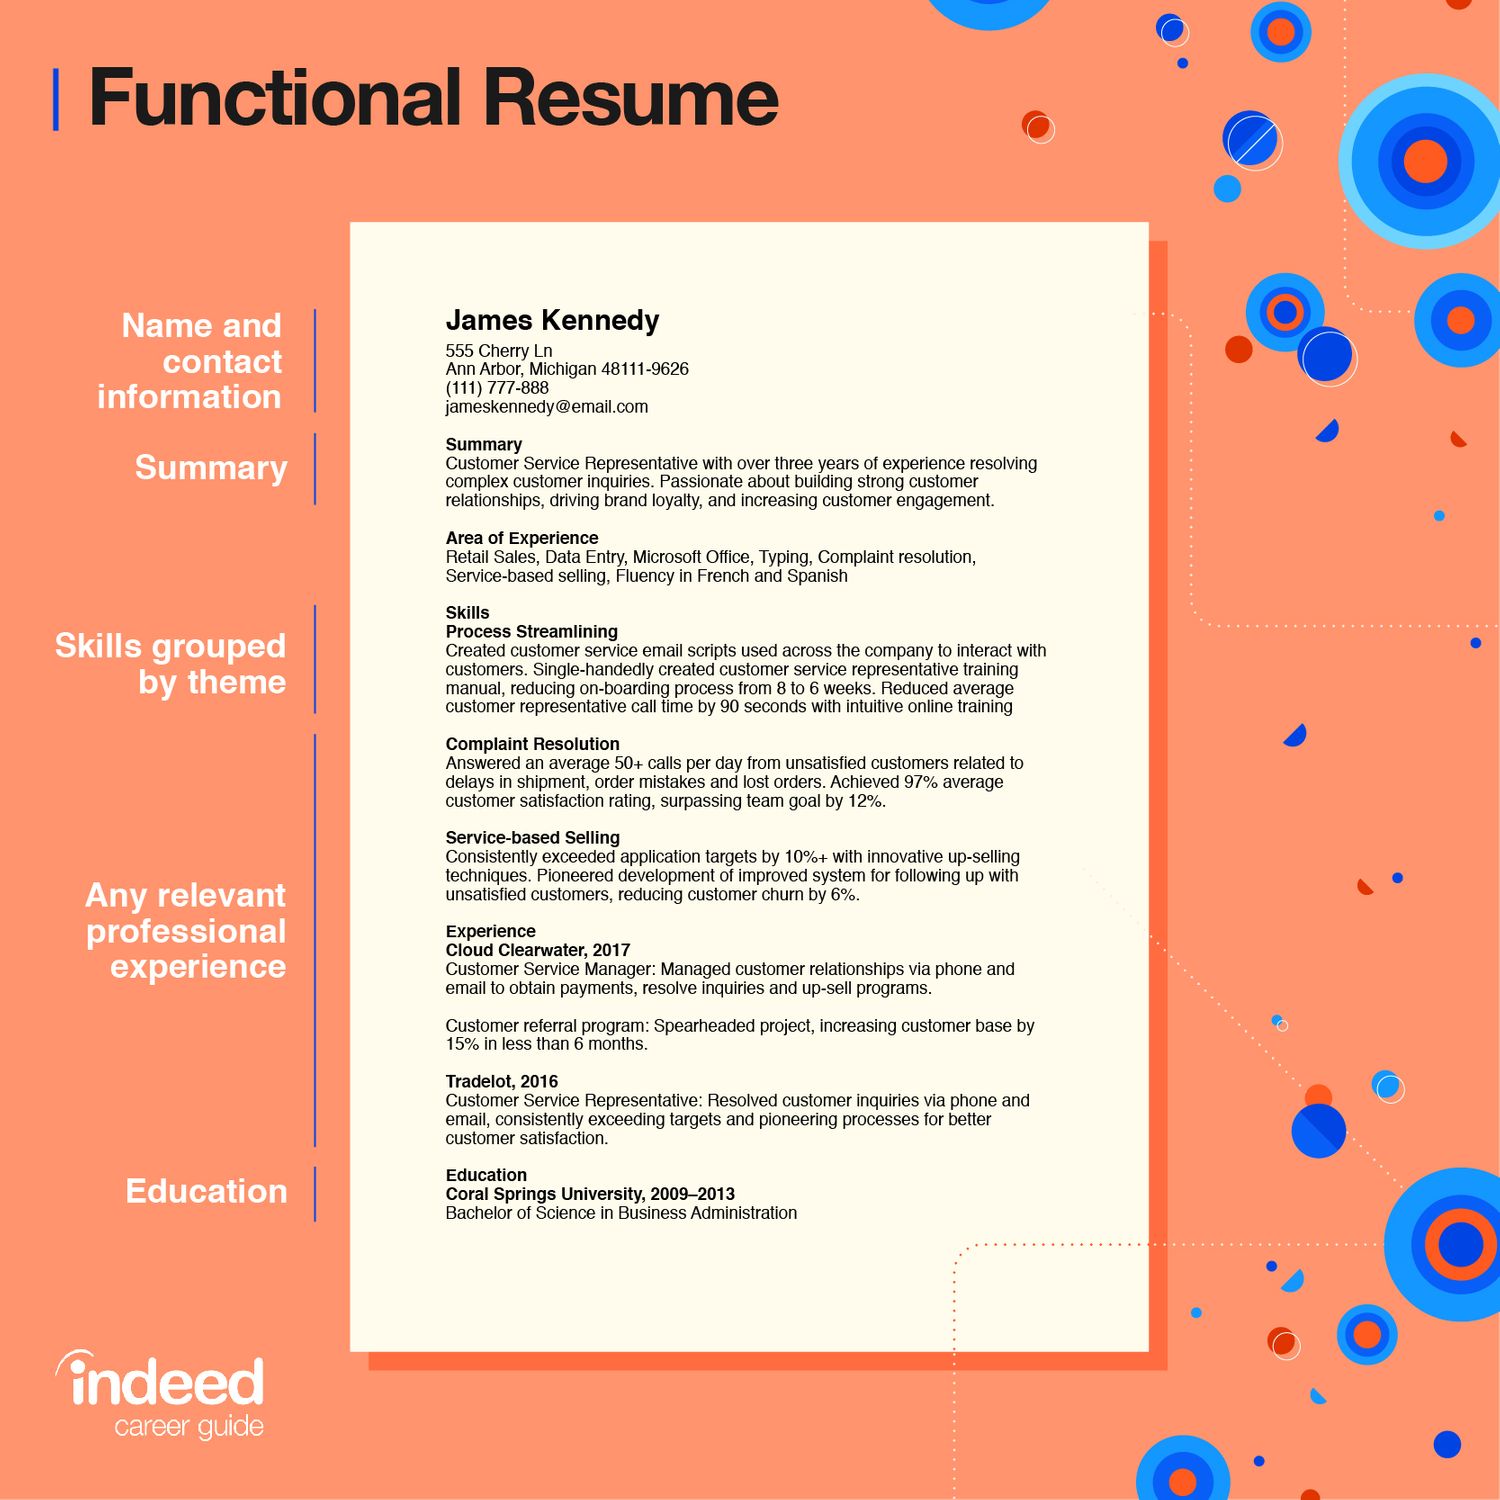 Functional Resume: Definition, Tips and Examples